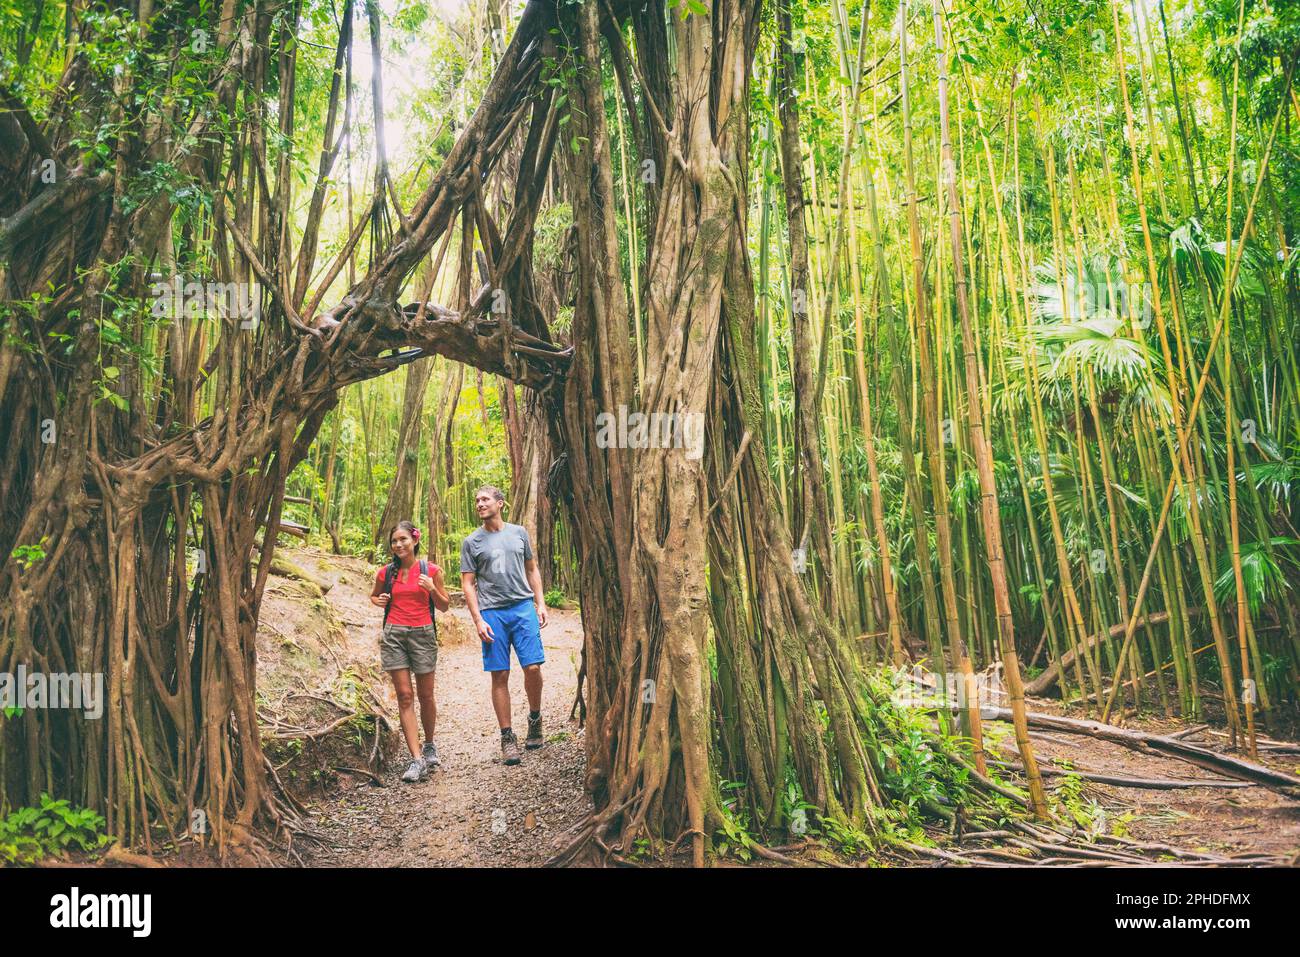 Hawaii hike hikers walking in lush rainforest trekking and hiking amongst banyan trees and bamboos, Oahu Travel. Couple tourists happy in nature Stock Photo